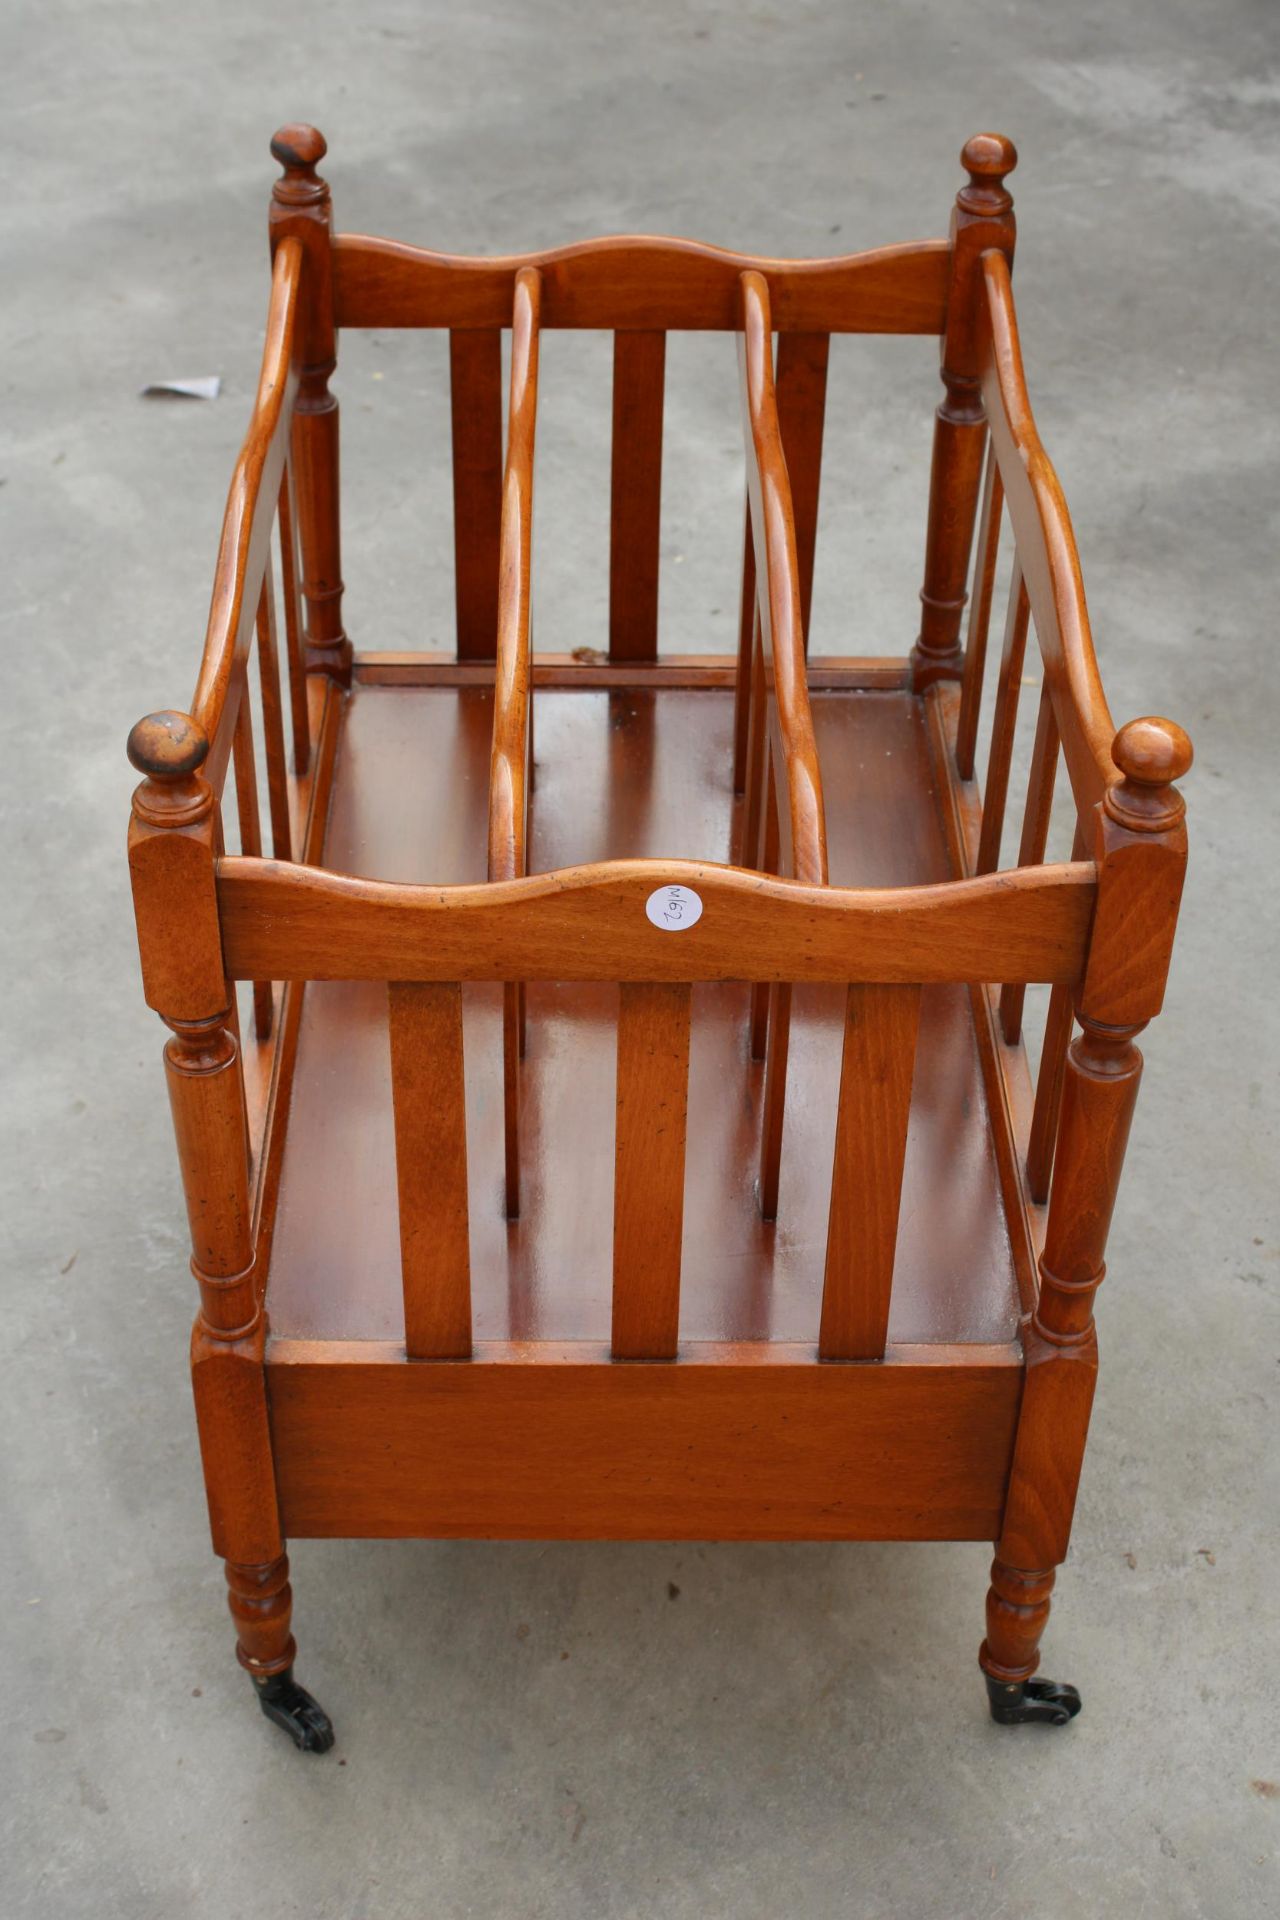 A REGENCY STYLE YEW WOOD THREE DIVISION CANTERBURY MAGAZINE RACK WITH LOWER DRAWER - Image 2 of 2